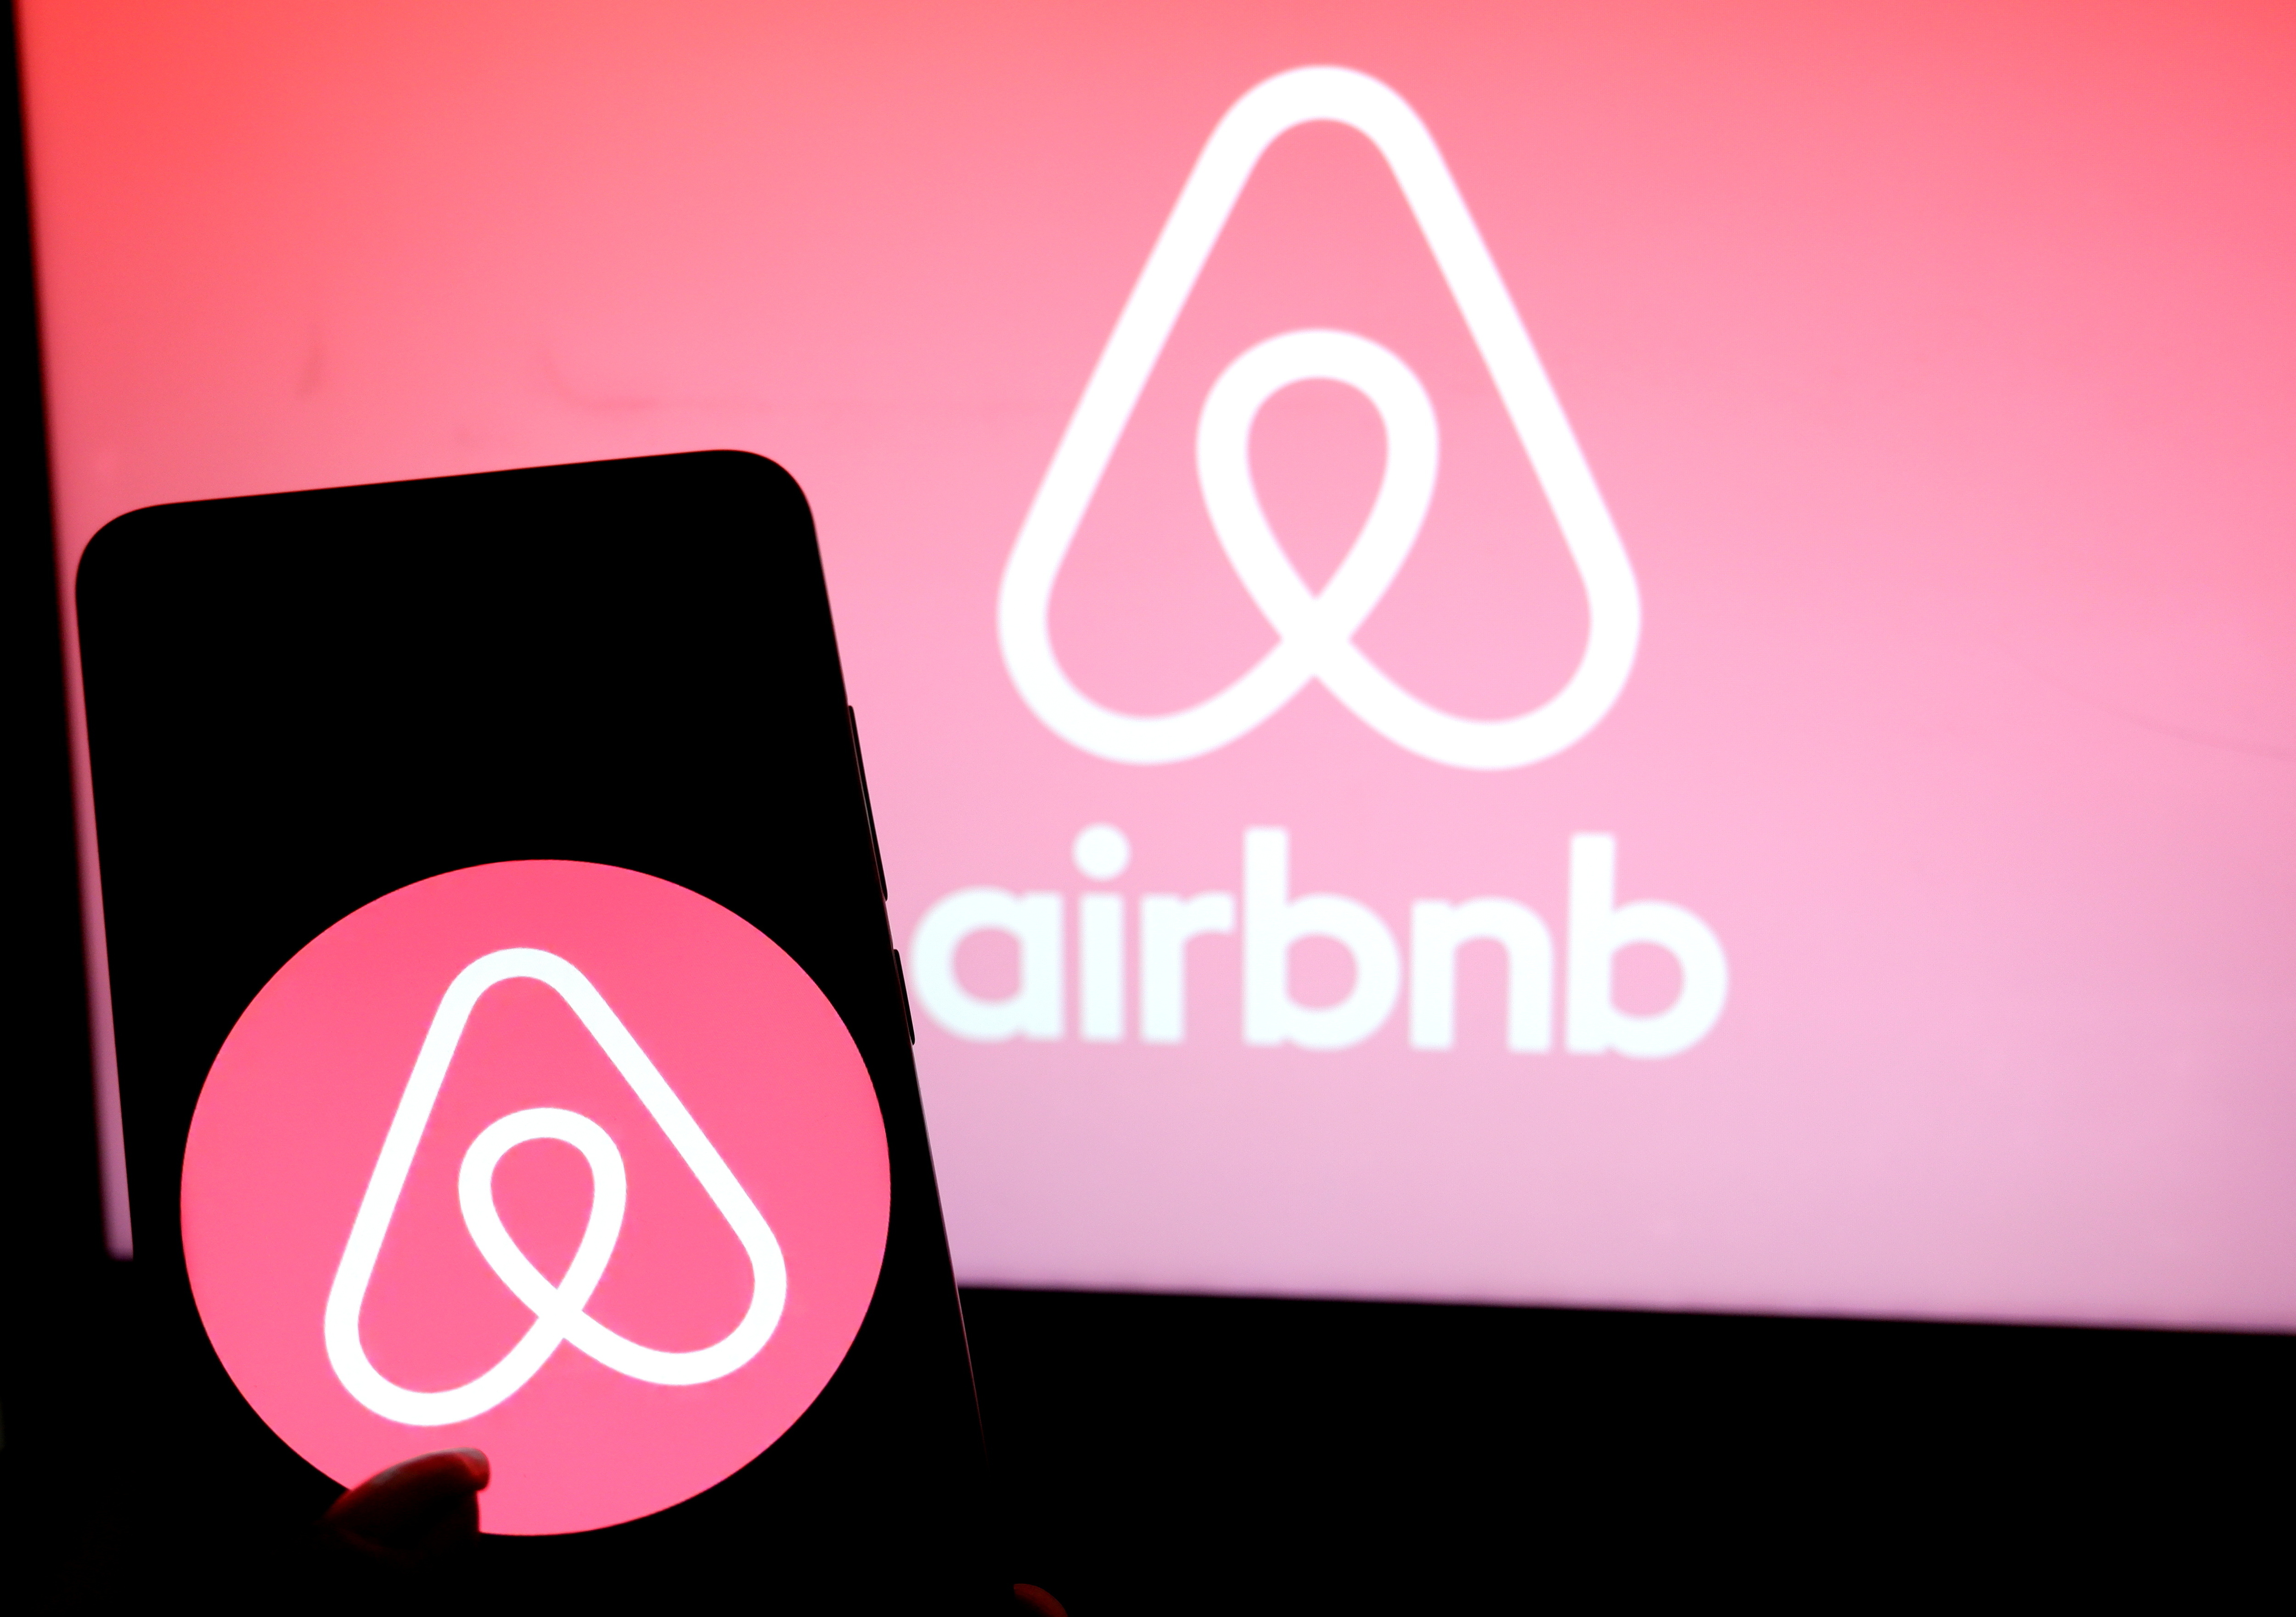 The Airbnb logo is seen displayed on a smartphone.